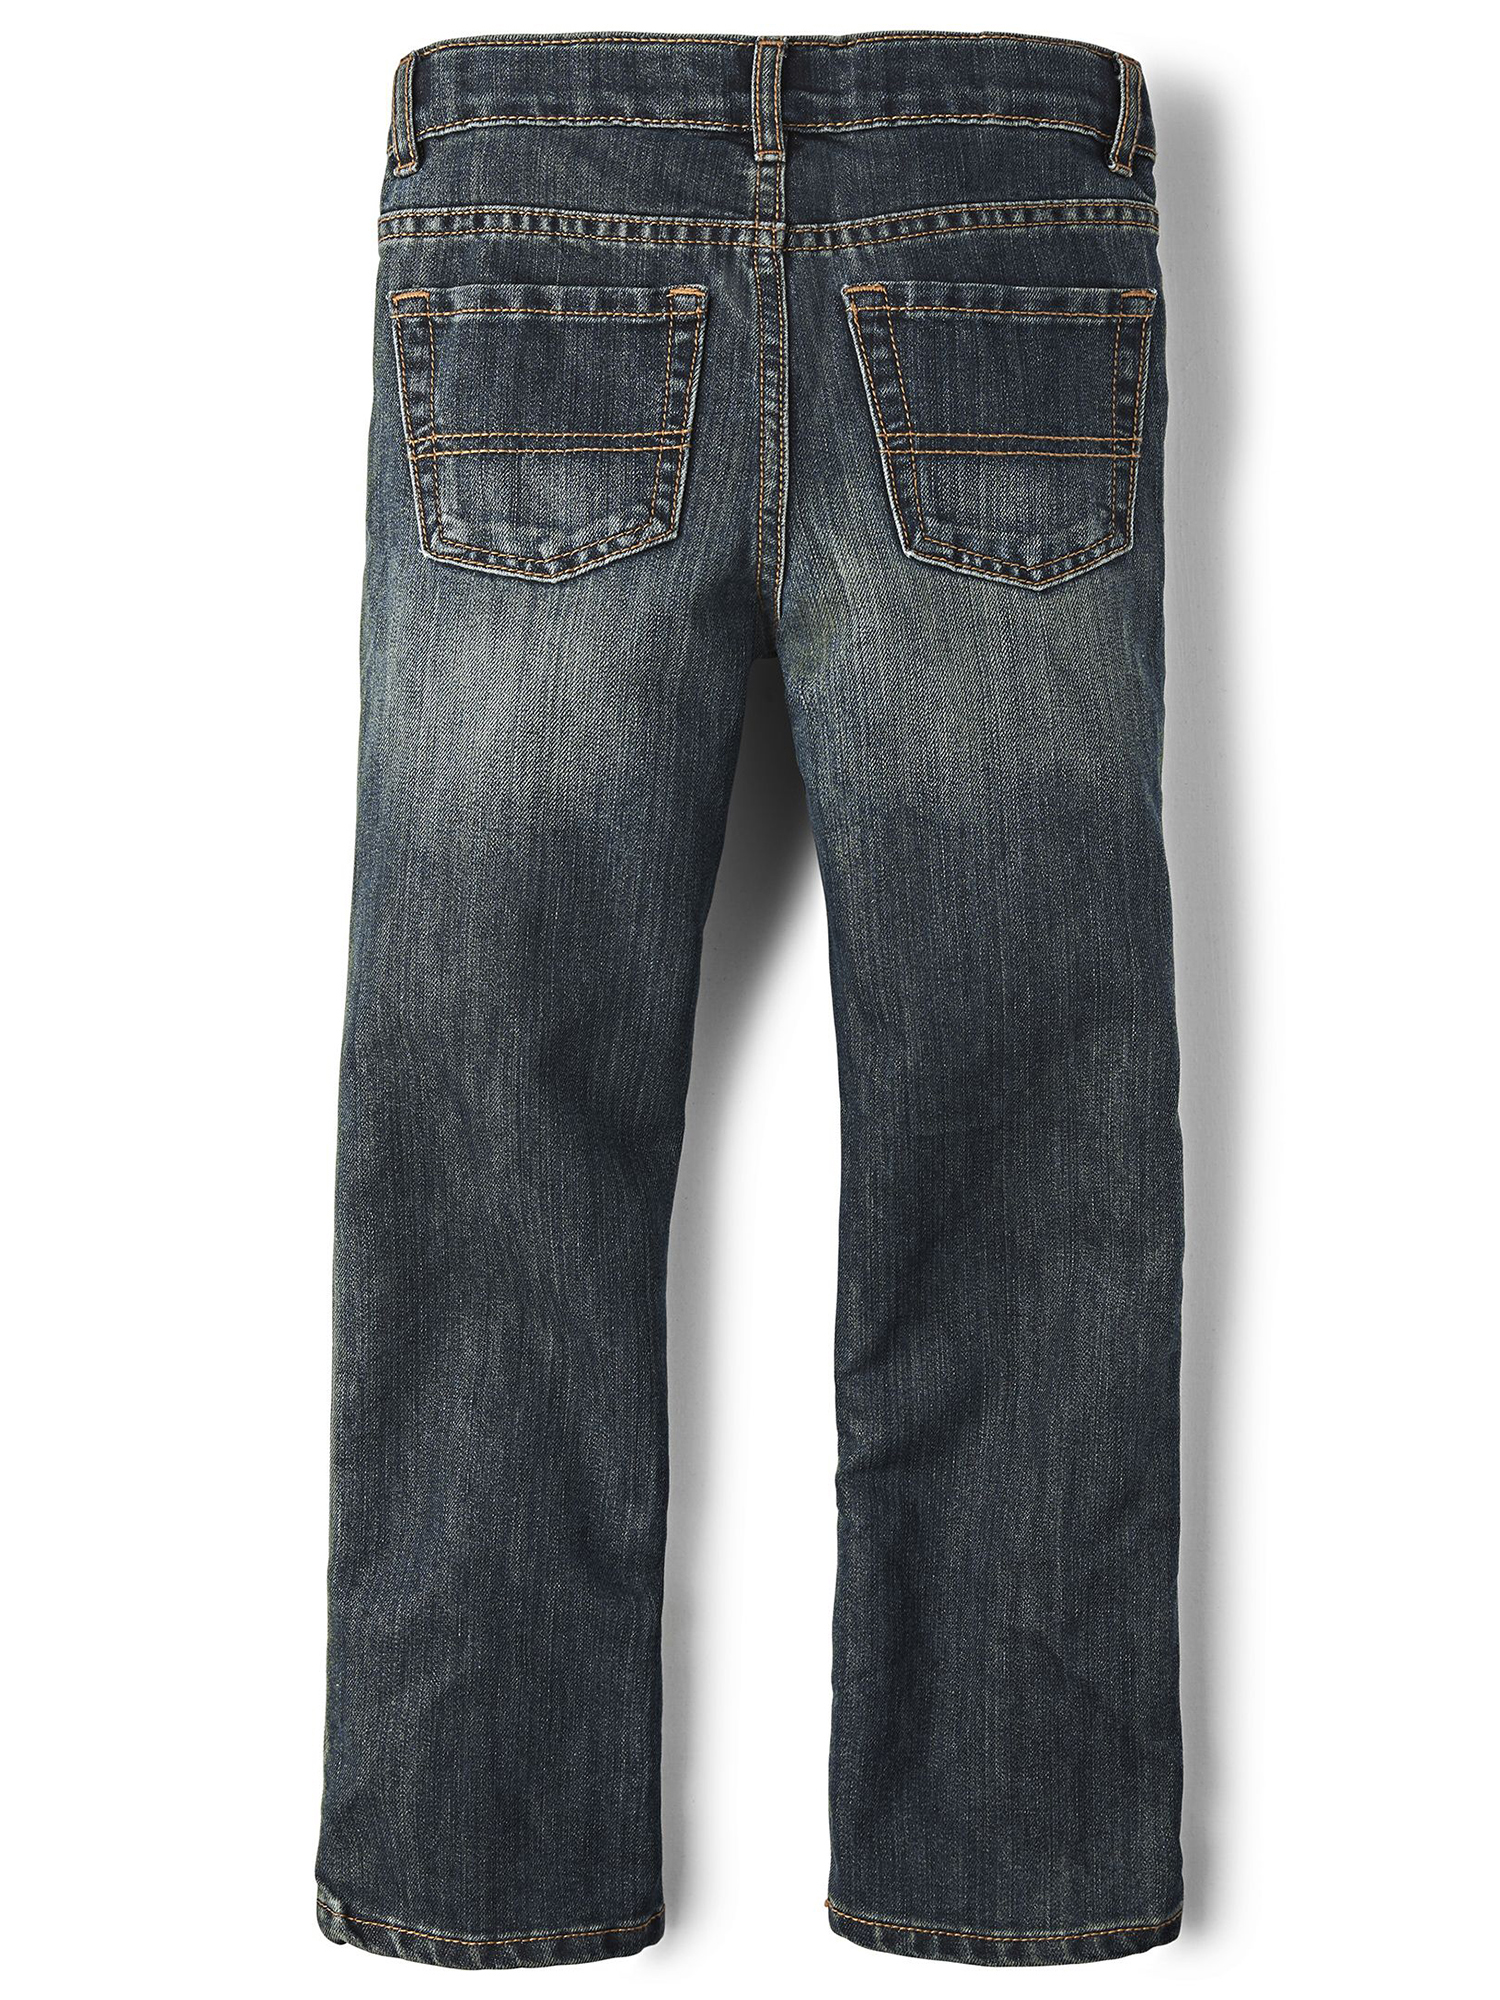 The Children's Place Big Boy's Bootcut Jeans - image 3 of 4